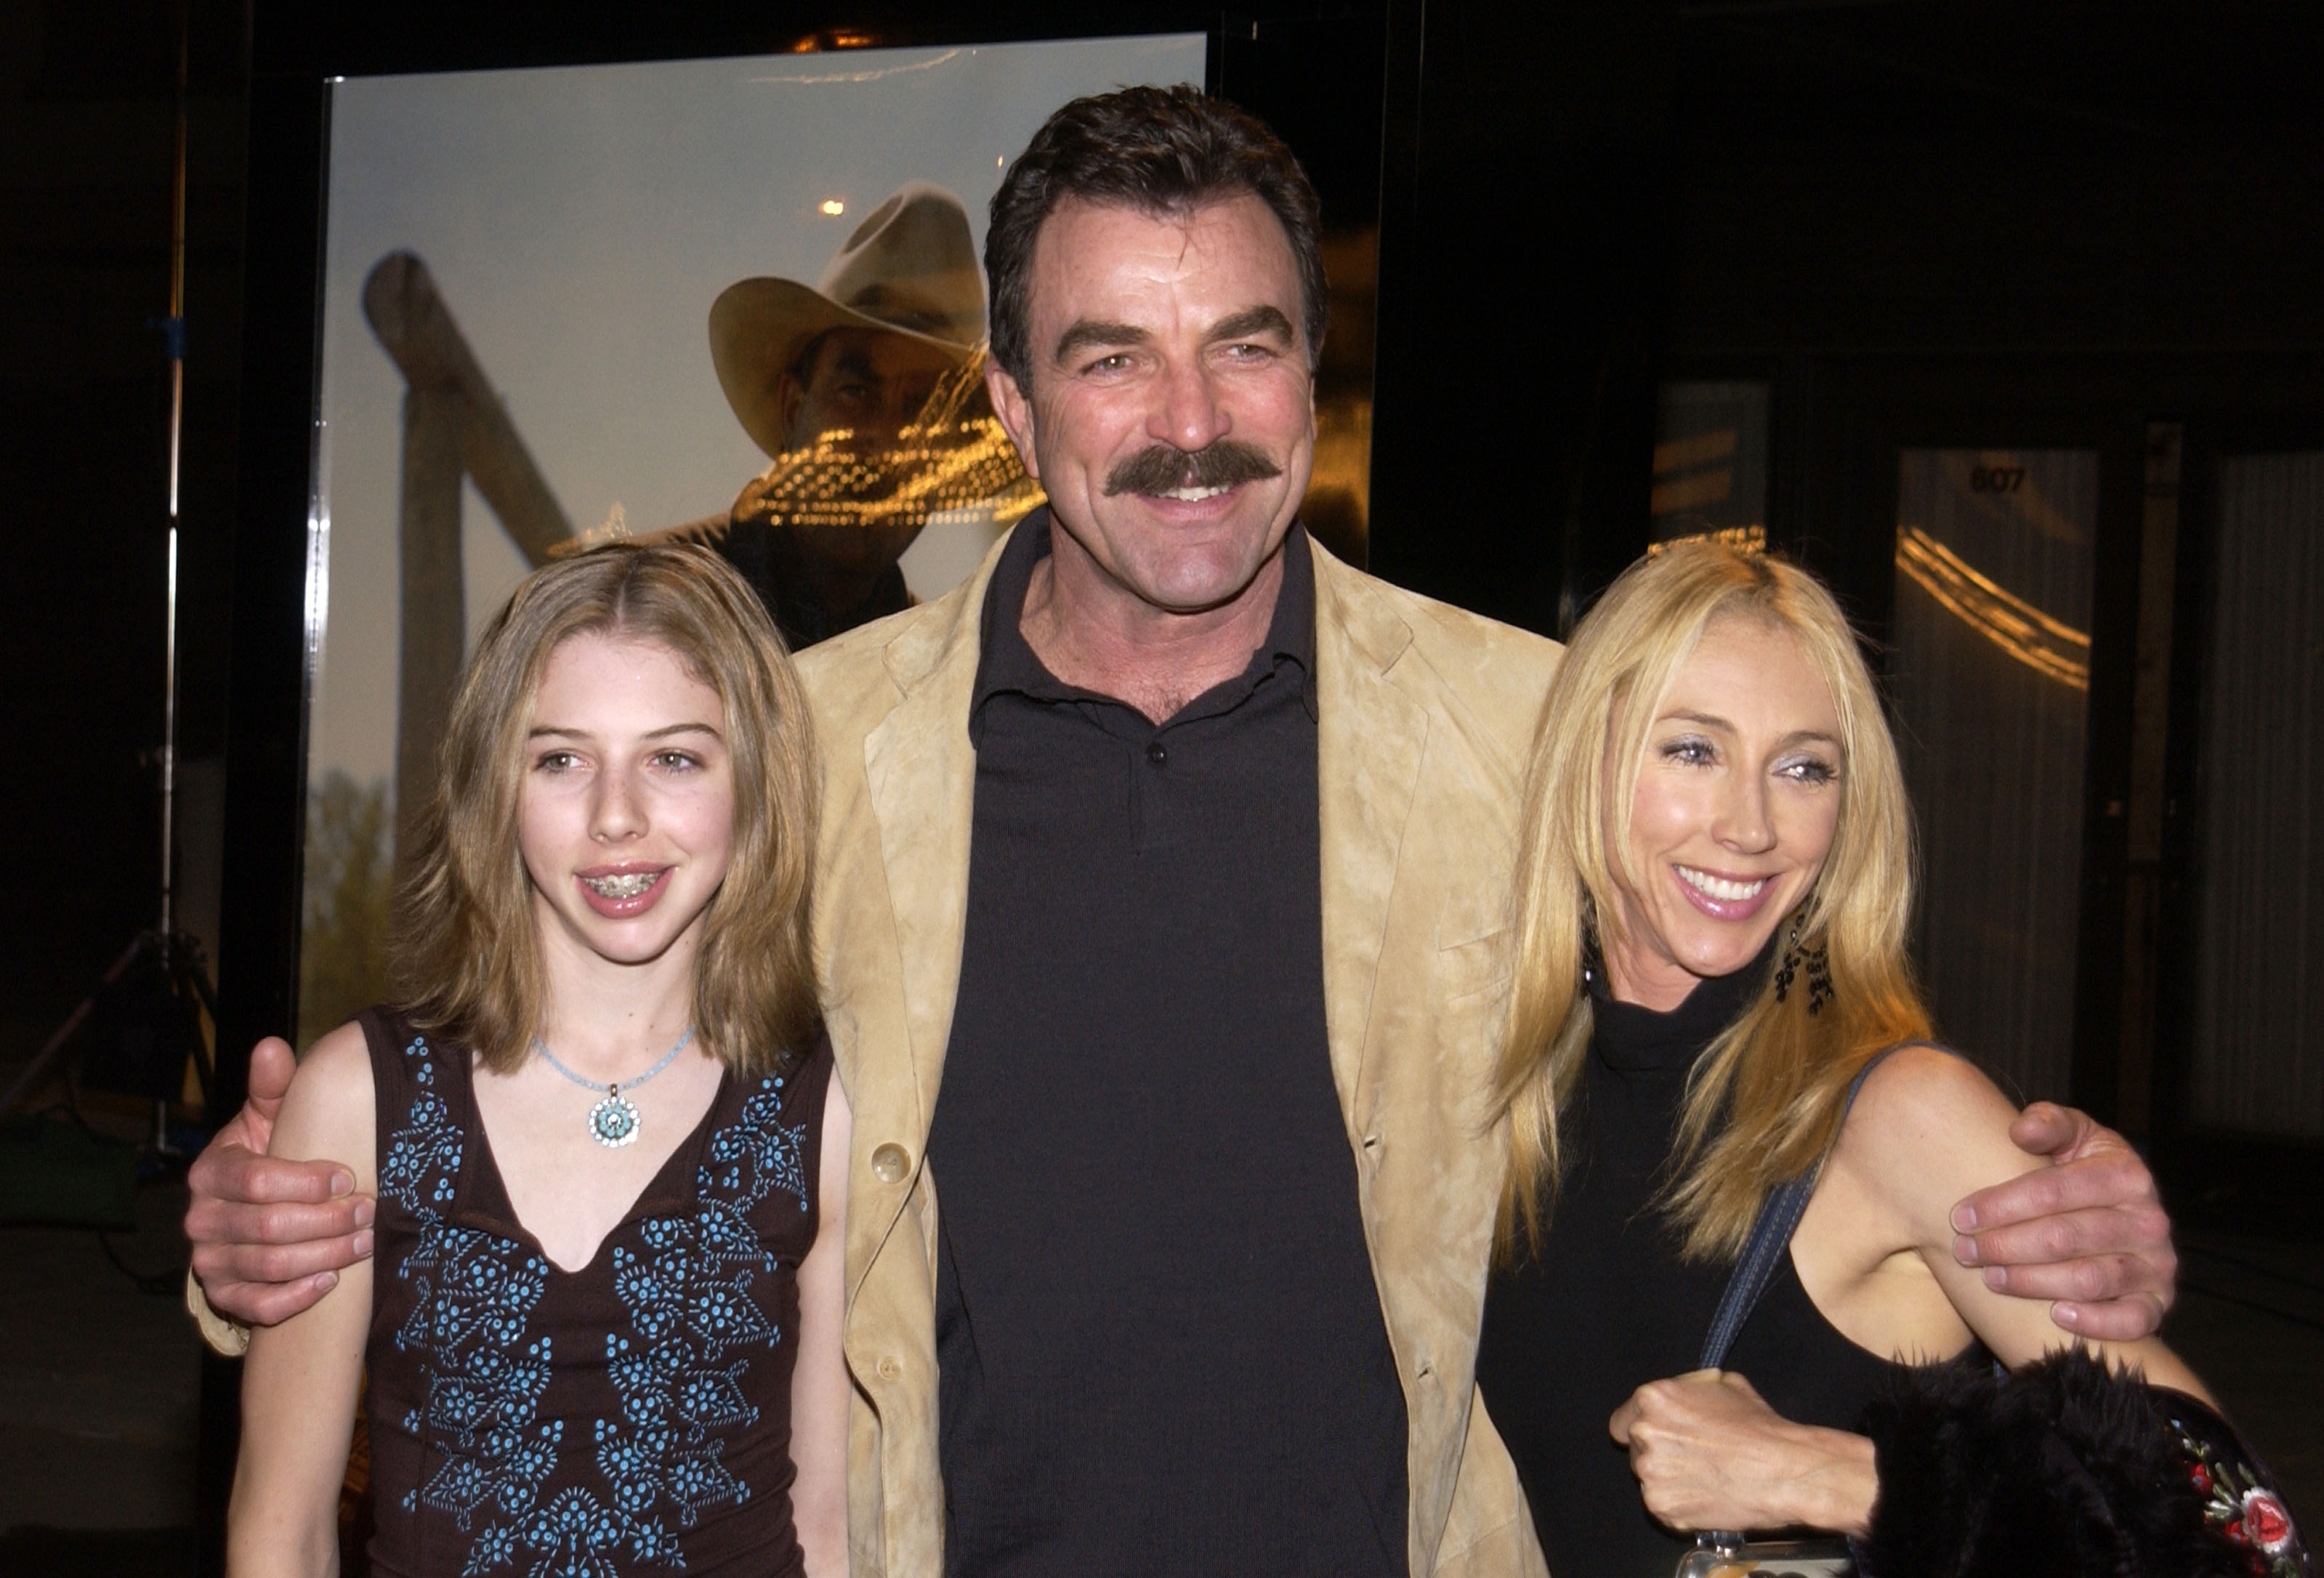 Hannah Selleck, Tom Selleck, and Jillie Mack at TNT's "Monte Walsh" premiere in Los Angeles on January 8, 2003 | Source: Getty Images